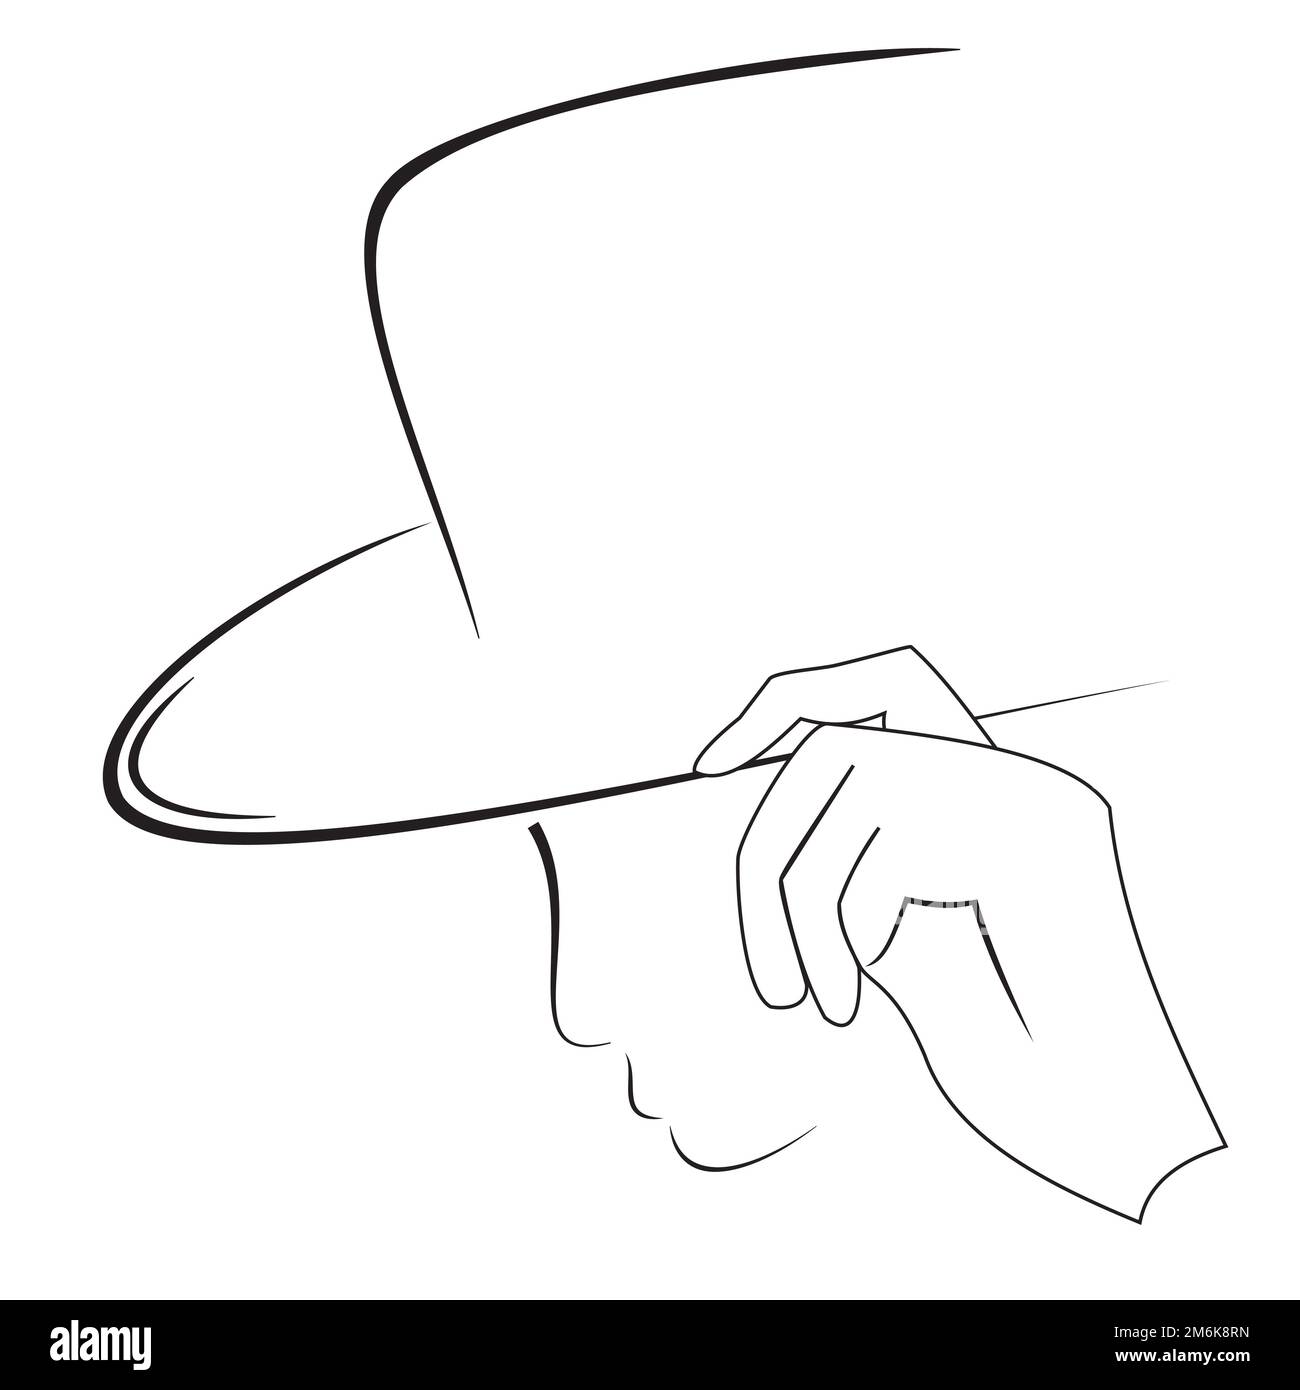 Hats contour and silhouette of the hand Stock Photo - Alamy